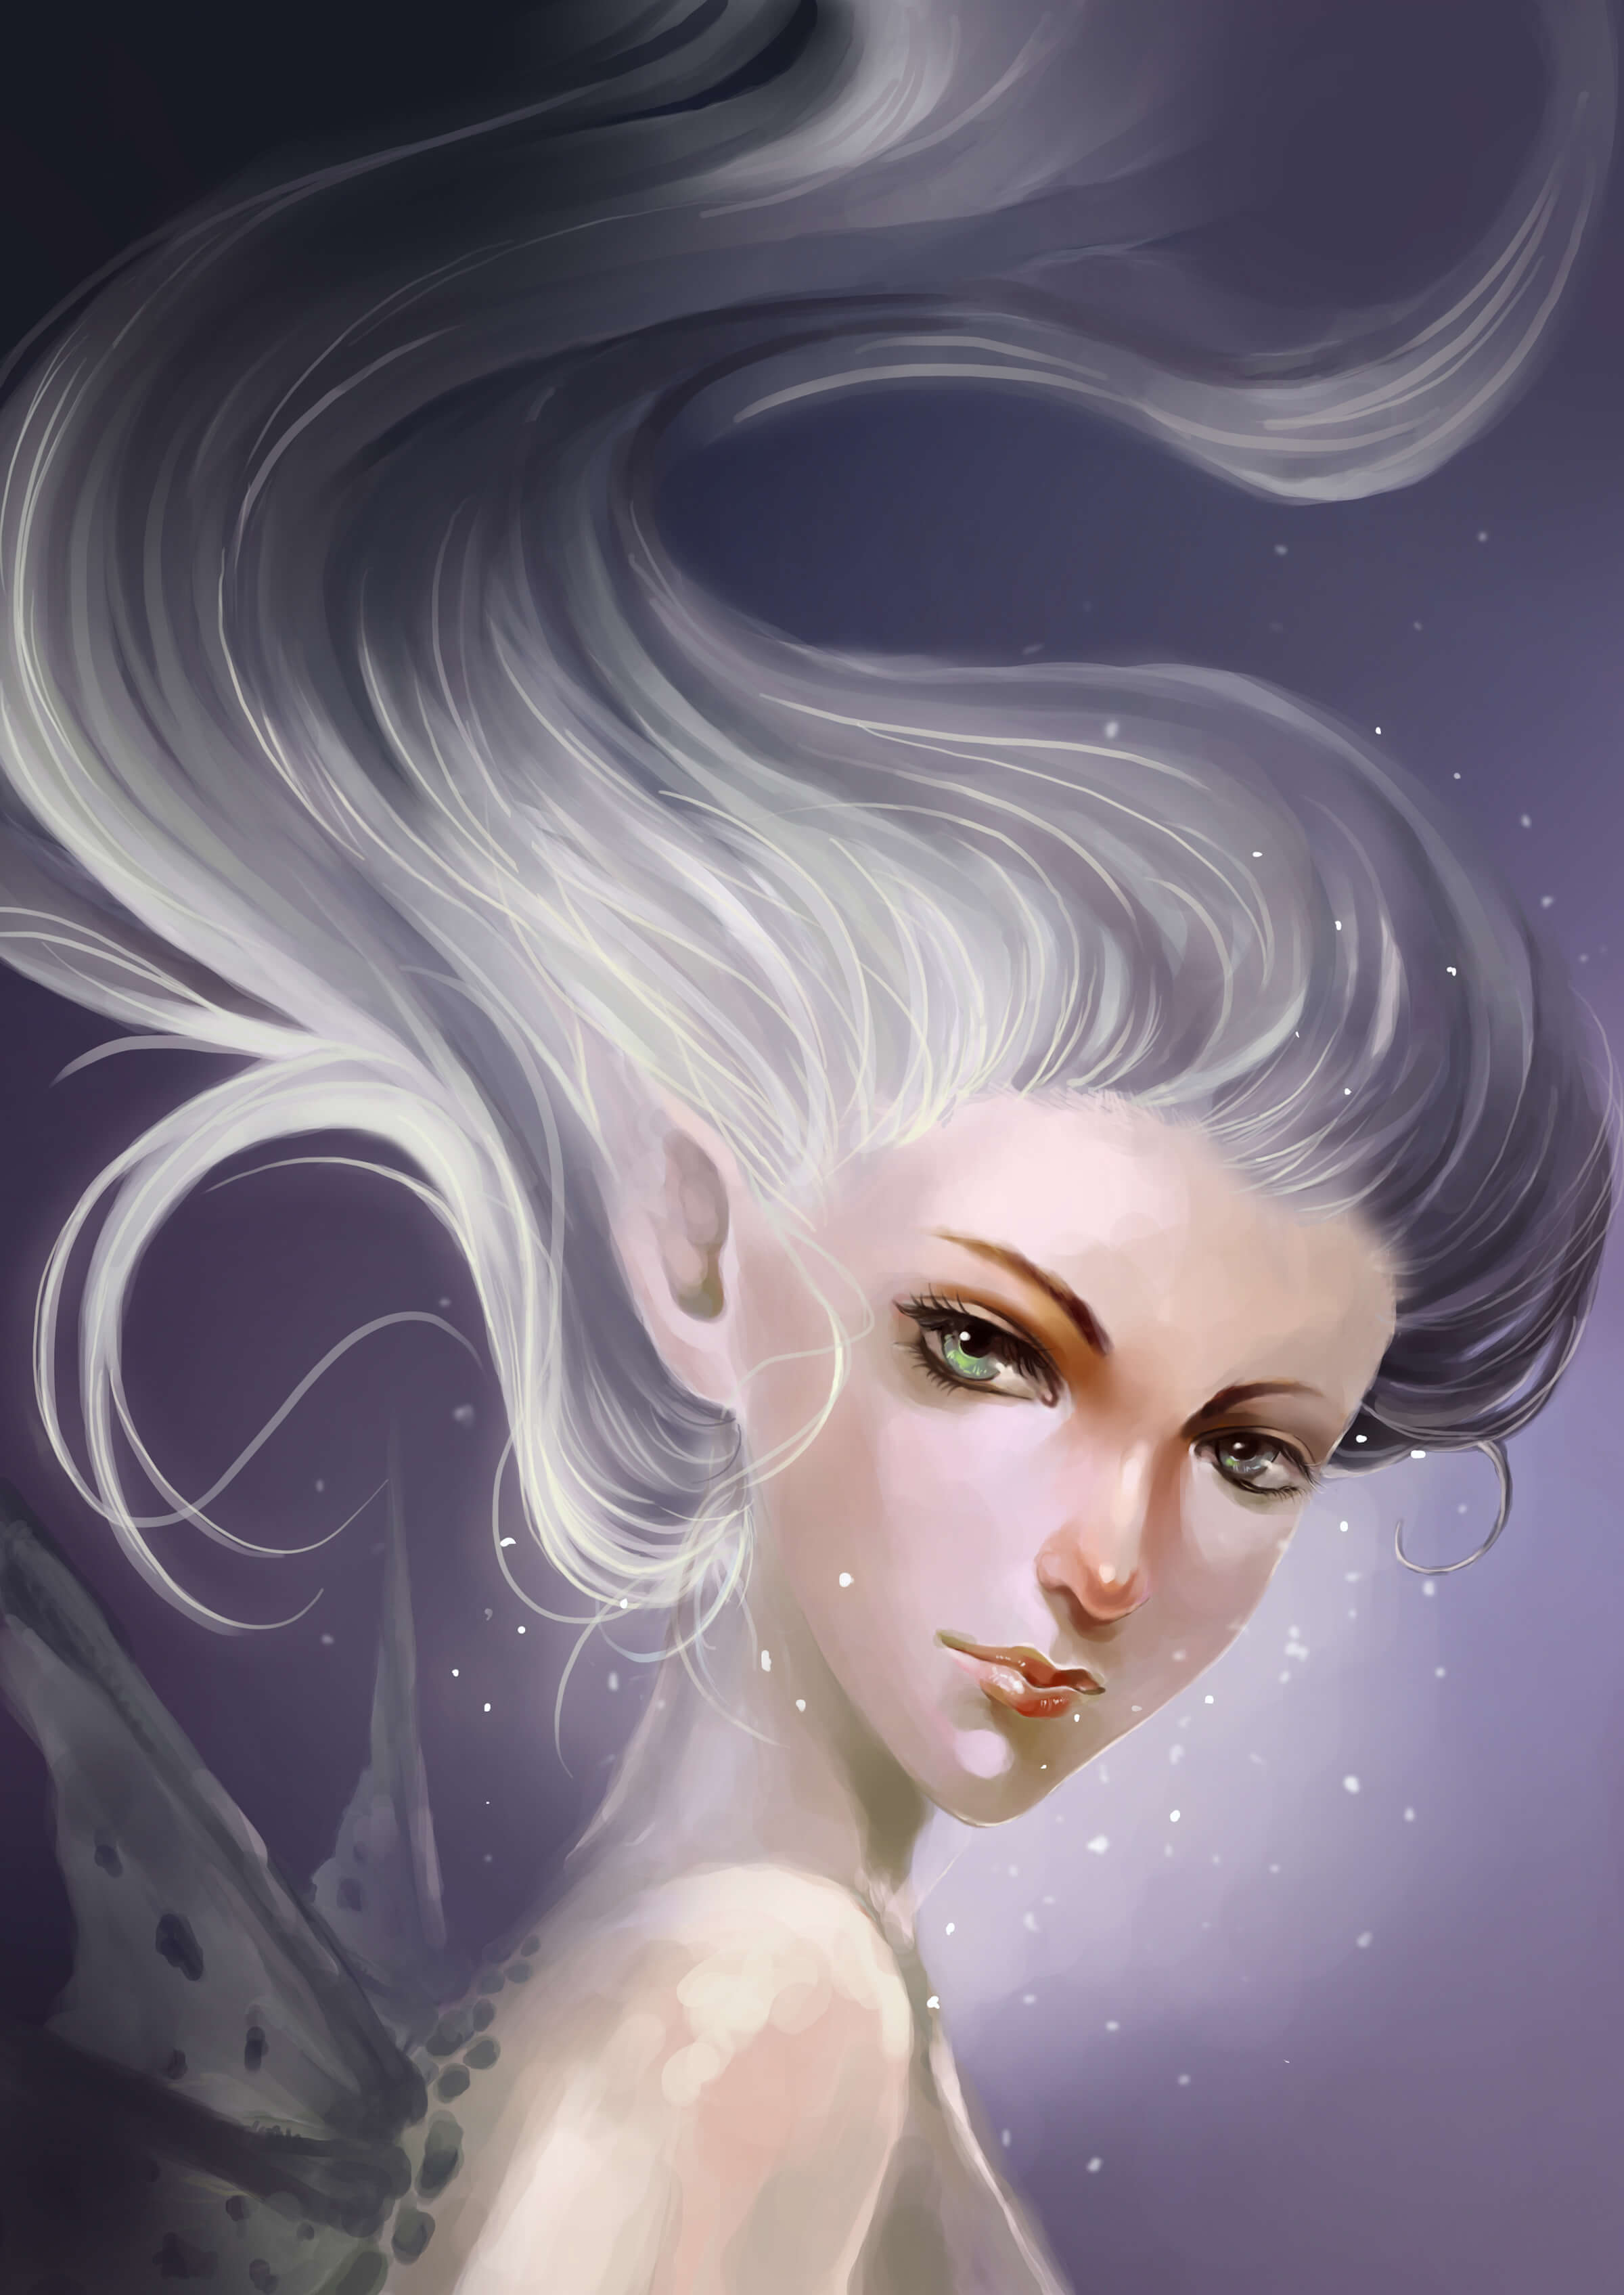 A portrait of a fairy-like character looking over her shoulder at the viewer, her white hair caught in an updraft.